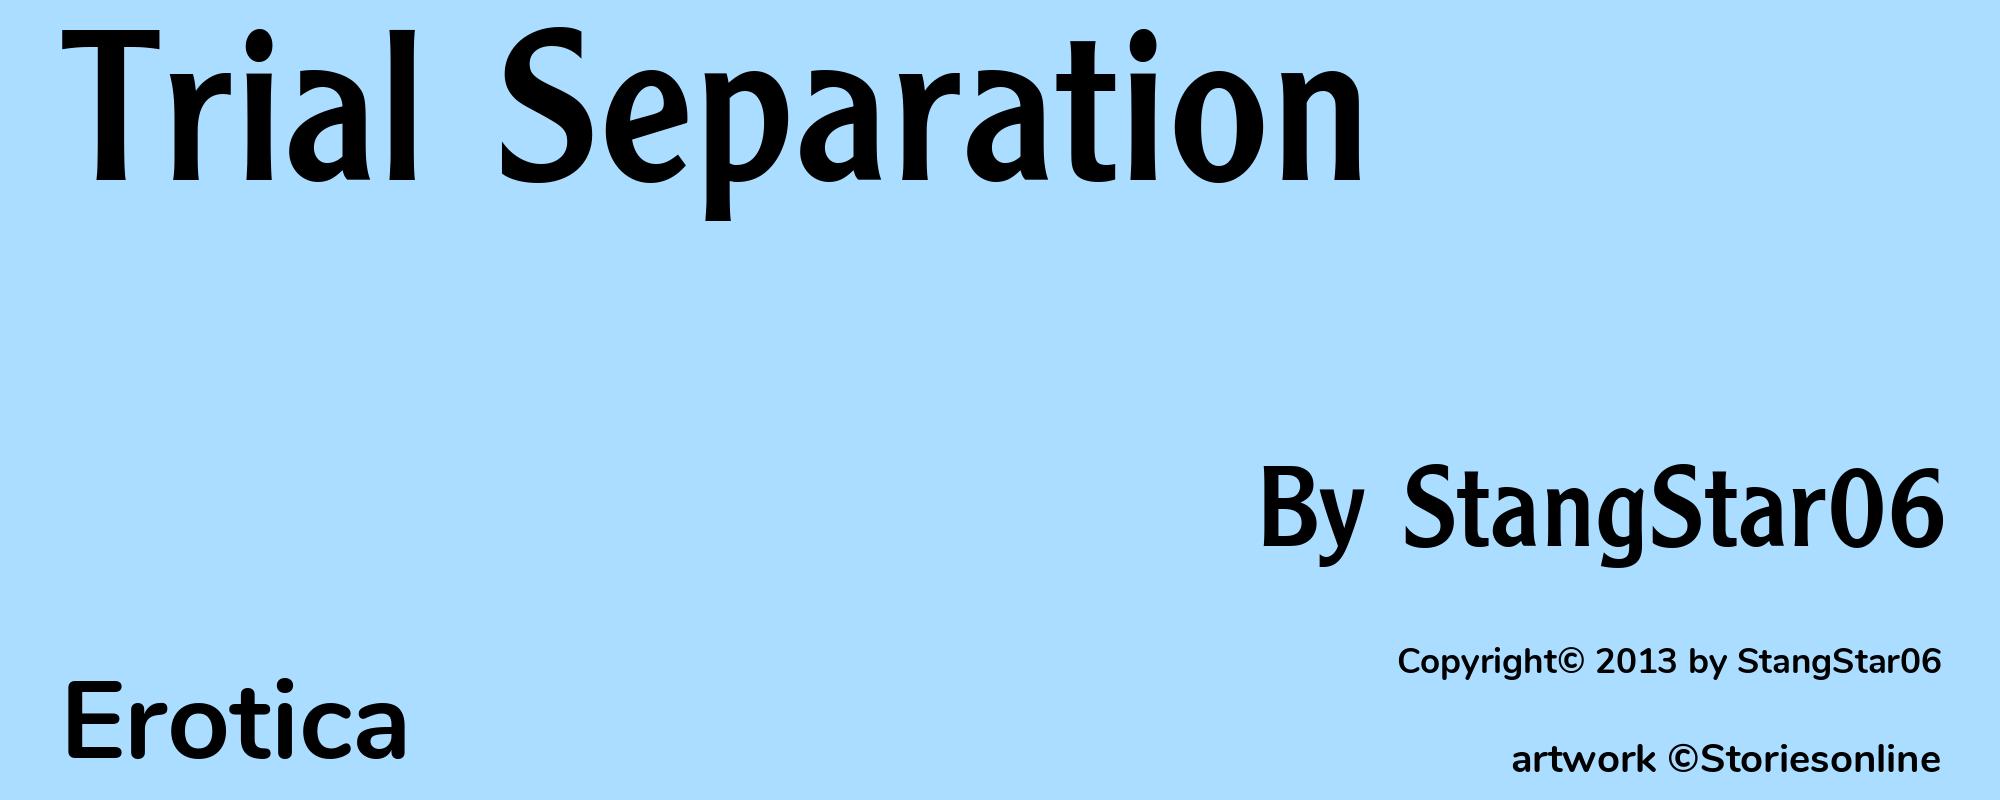 Trial Separation - Cover